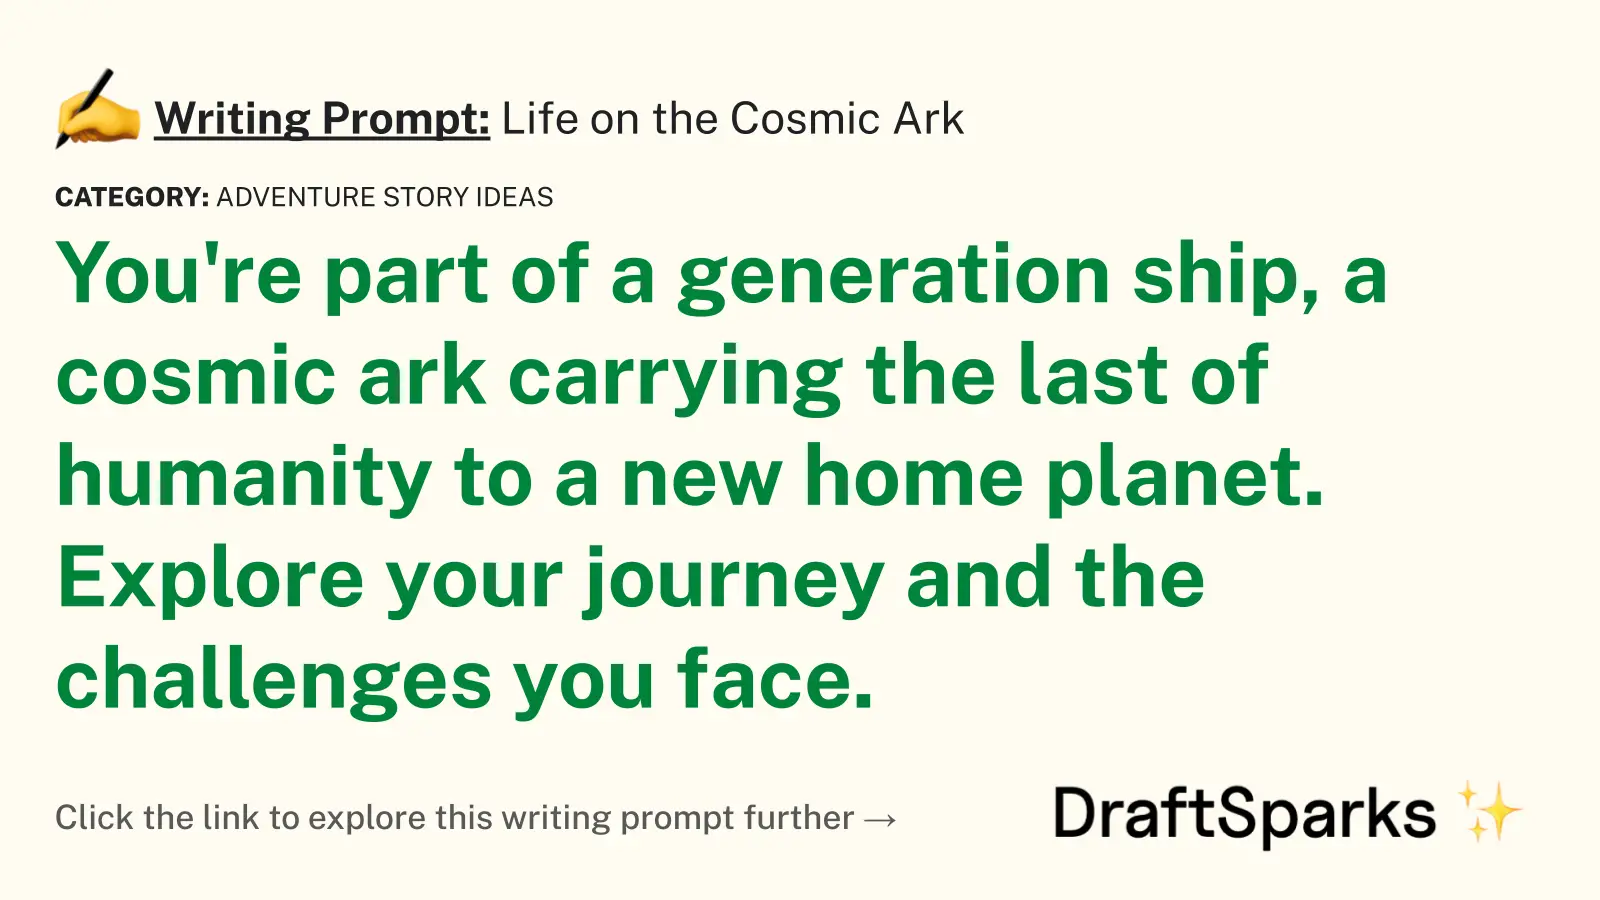 Life on the Cosmic Ark